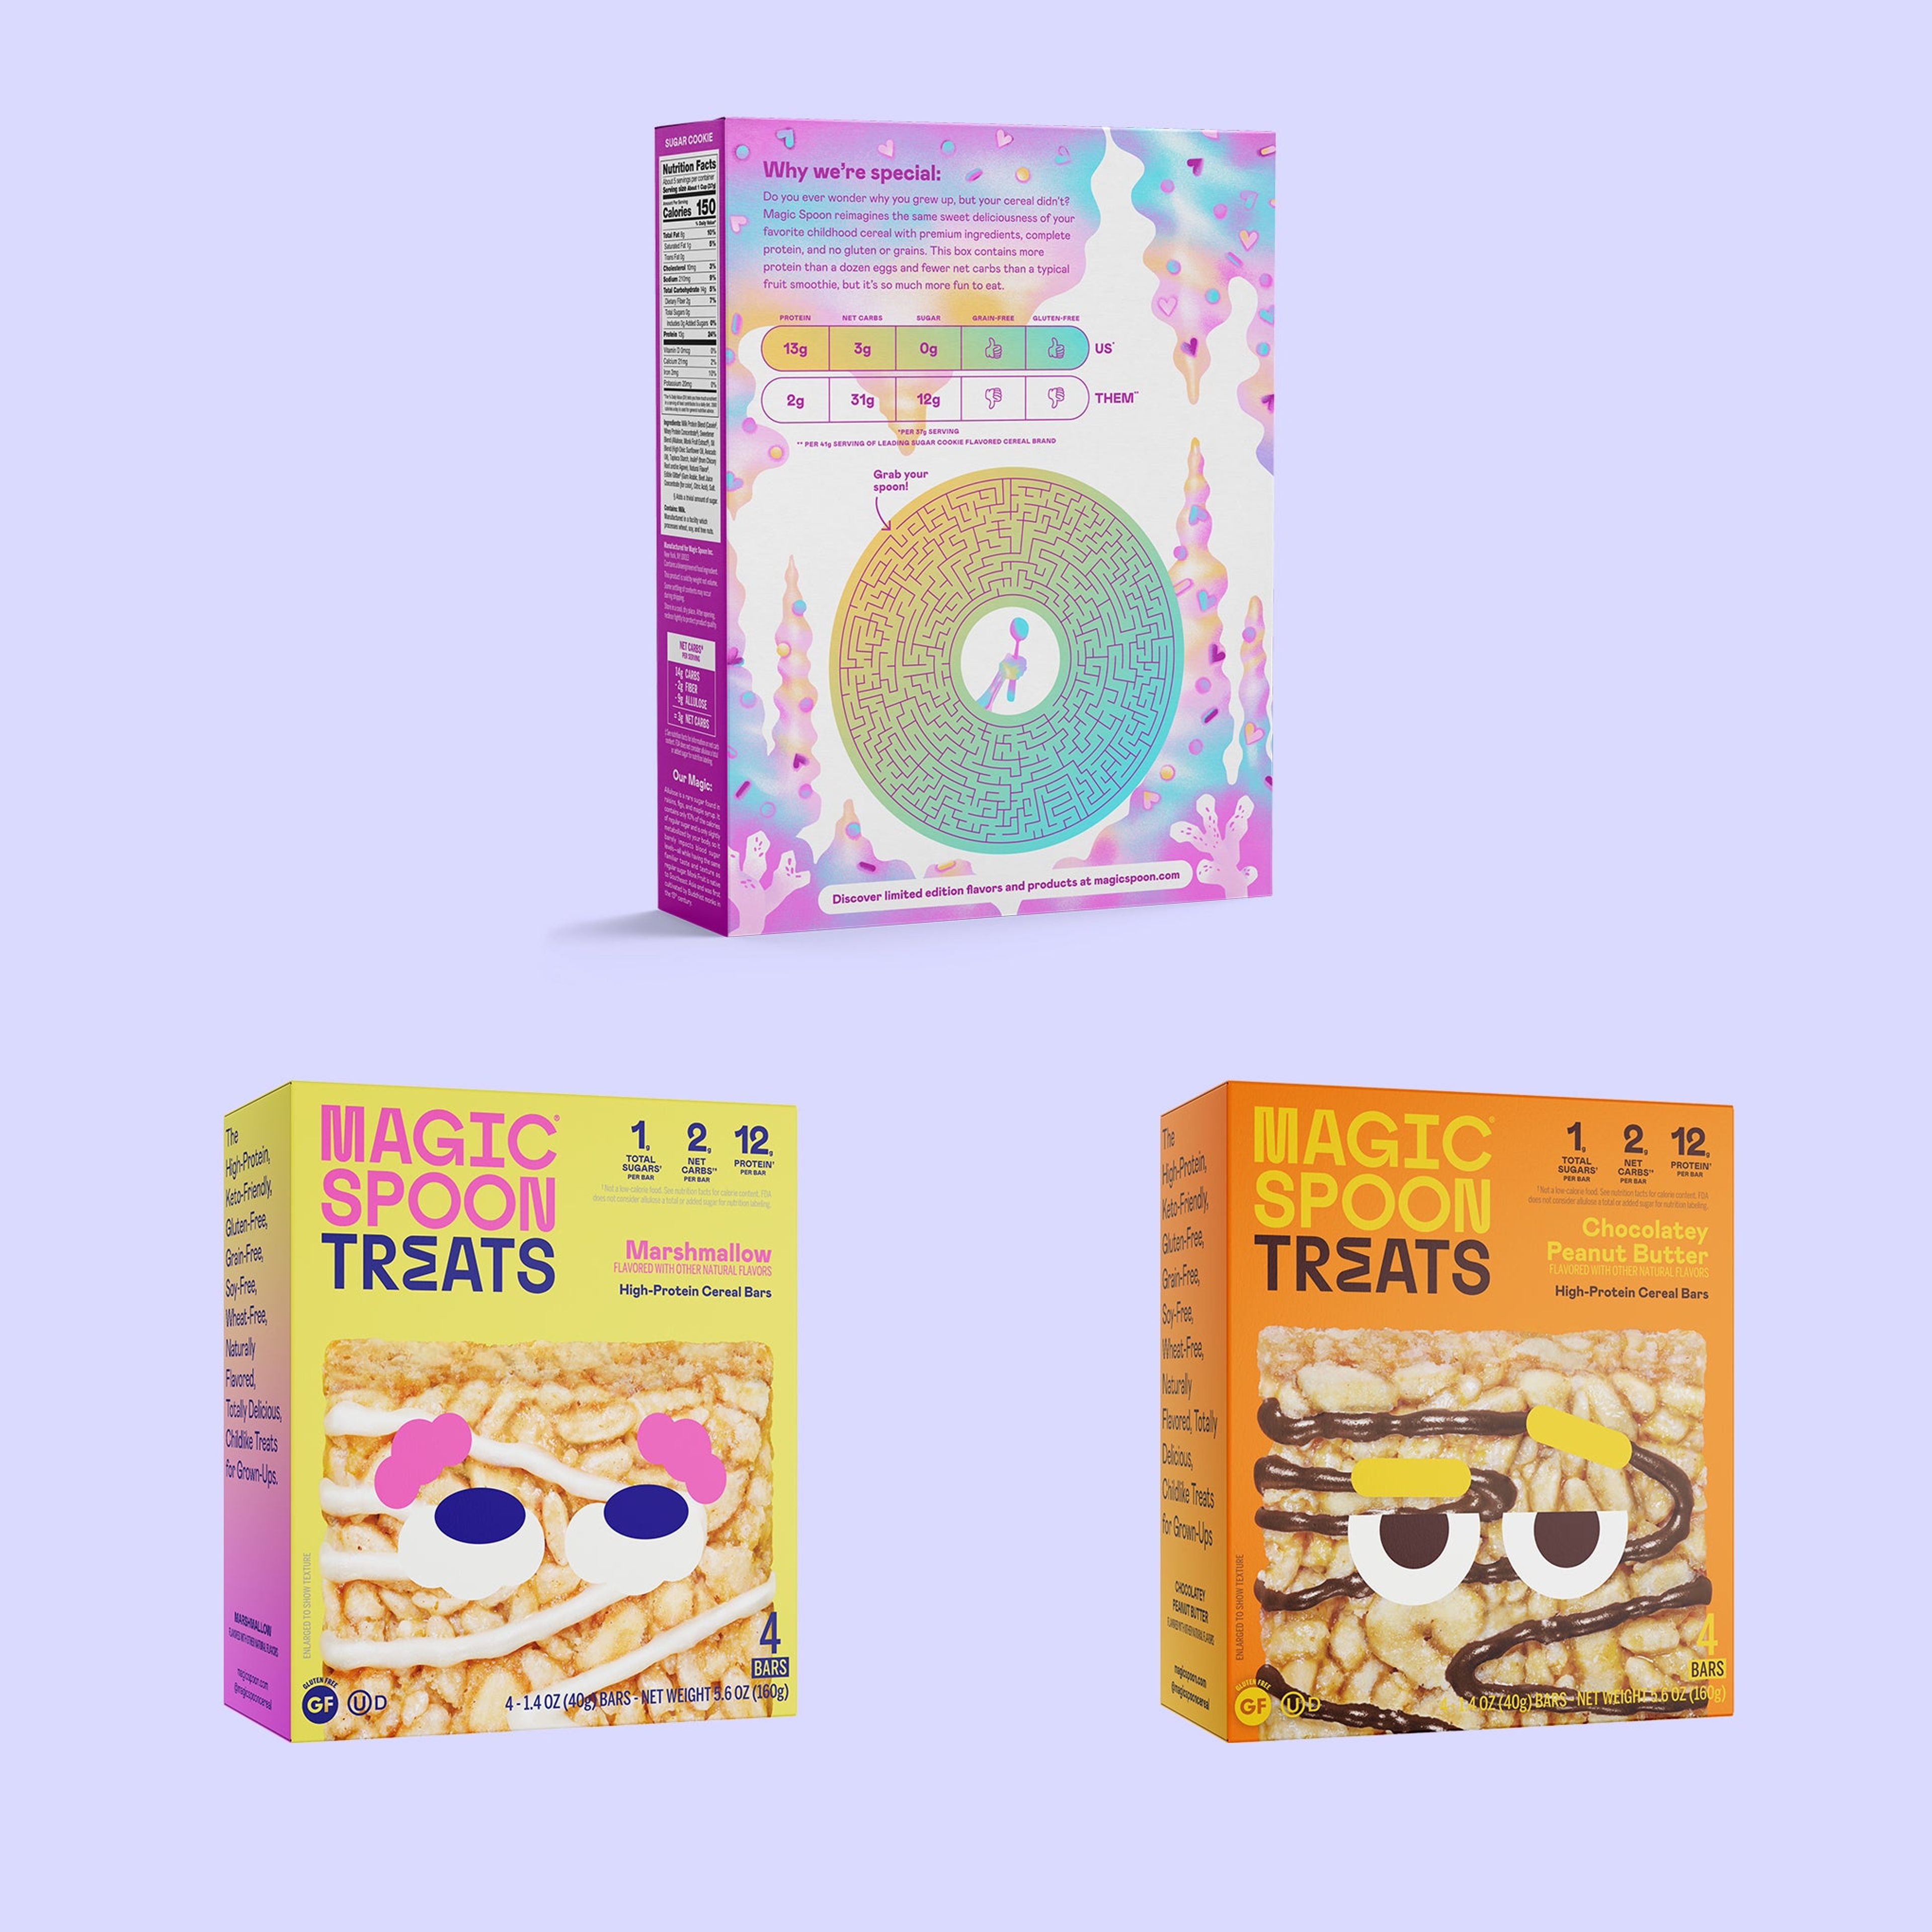 Holiday Treats Pack  - 8 cereal treats (2 boxes) + 2 boxes of cereal